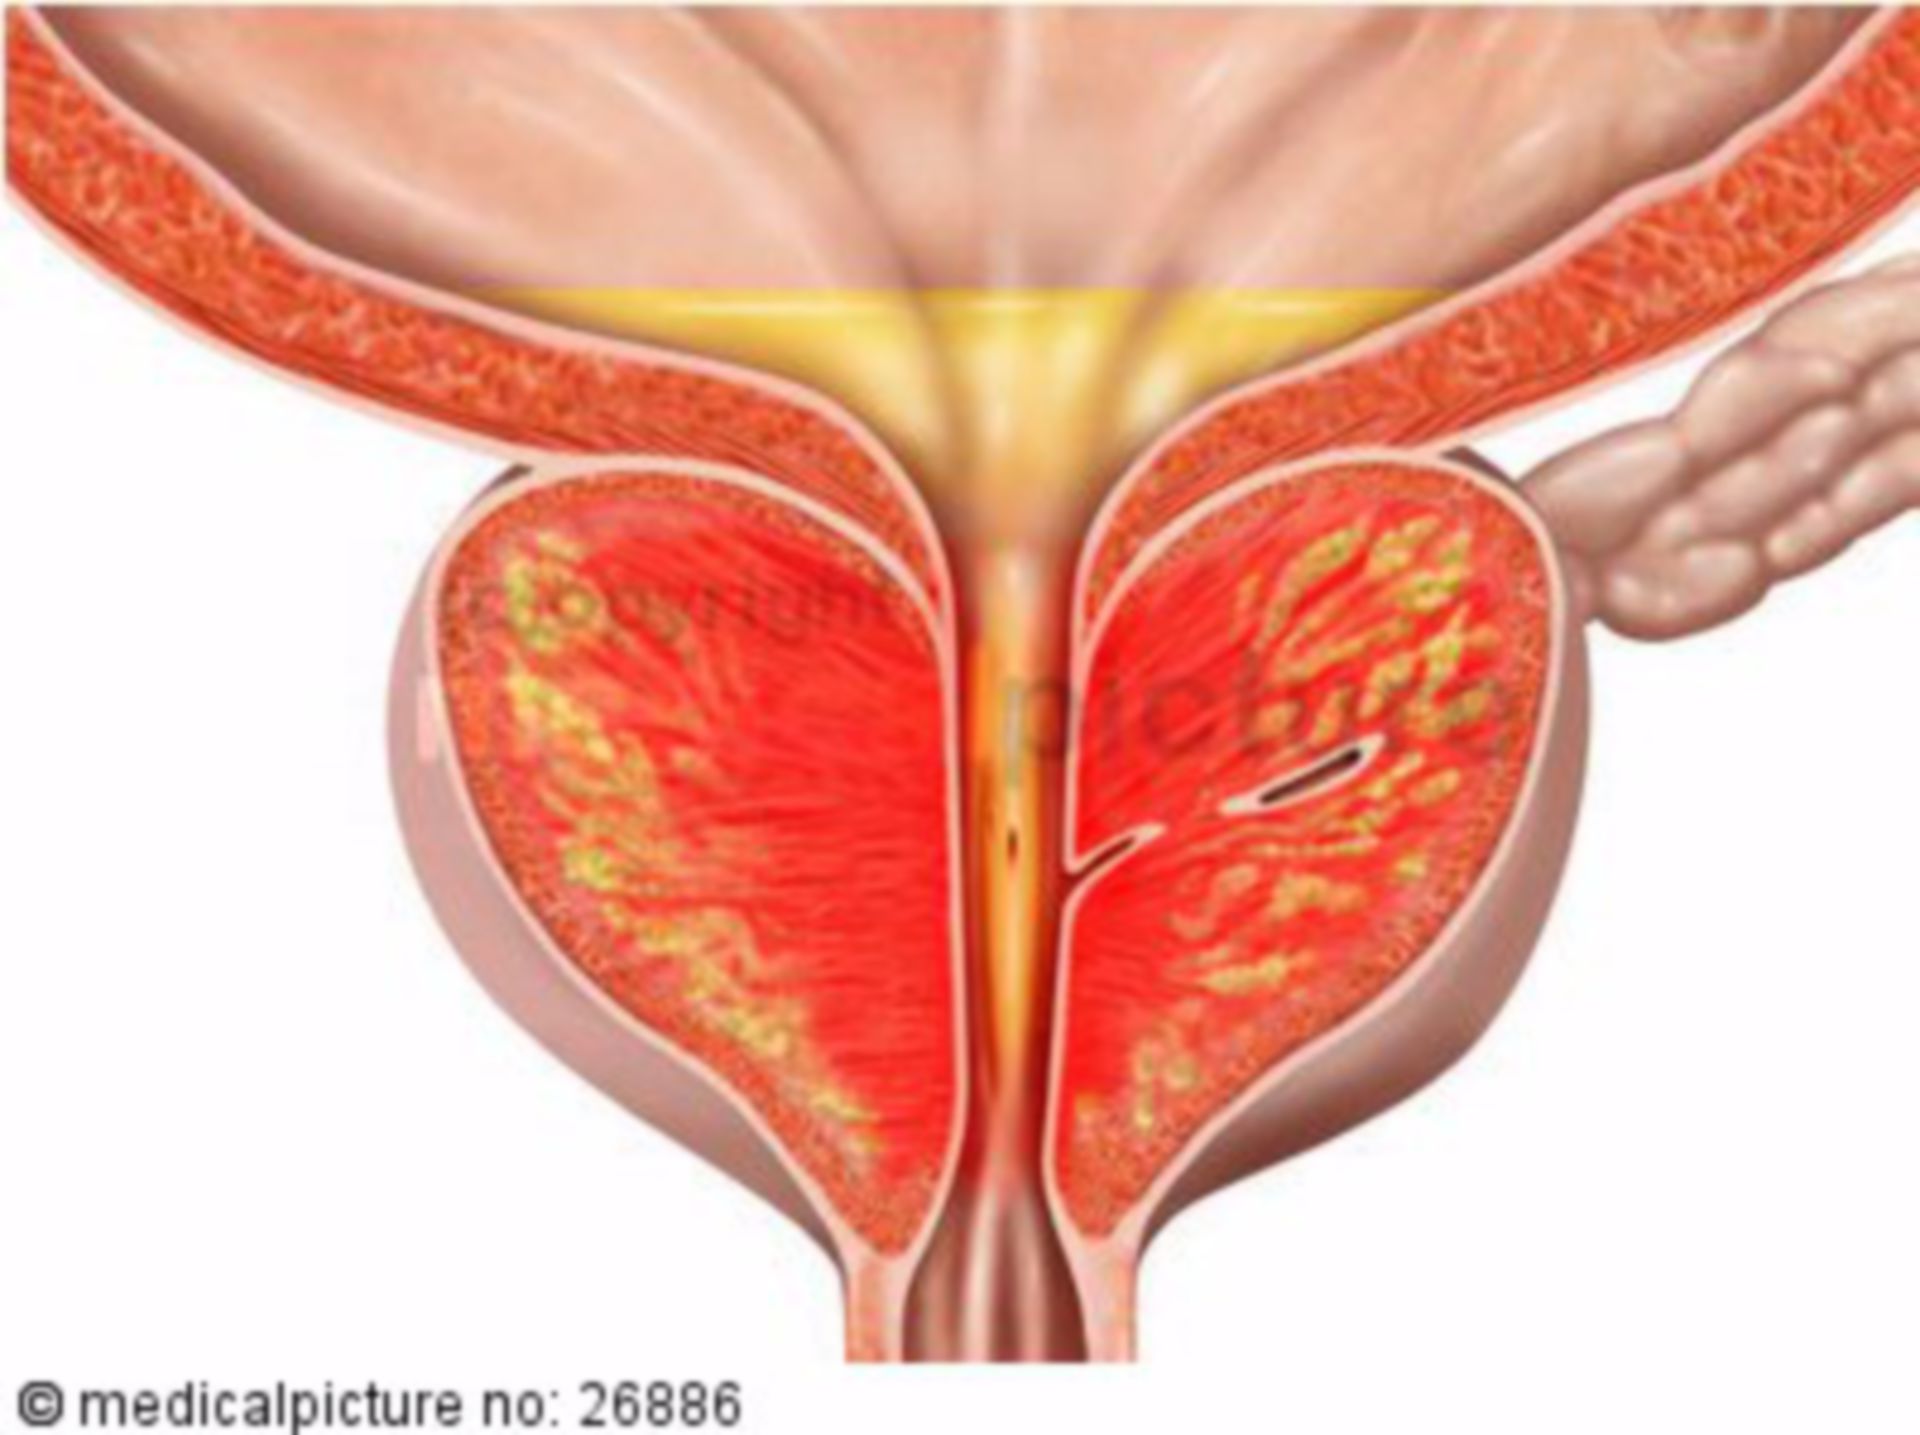 Inflamed prostate with urine retention